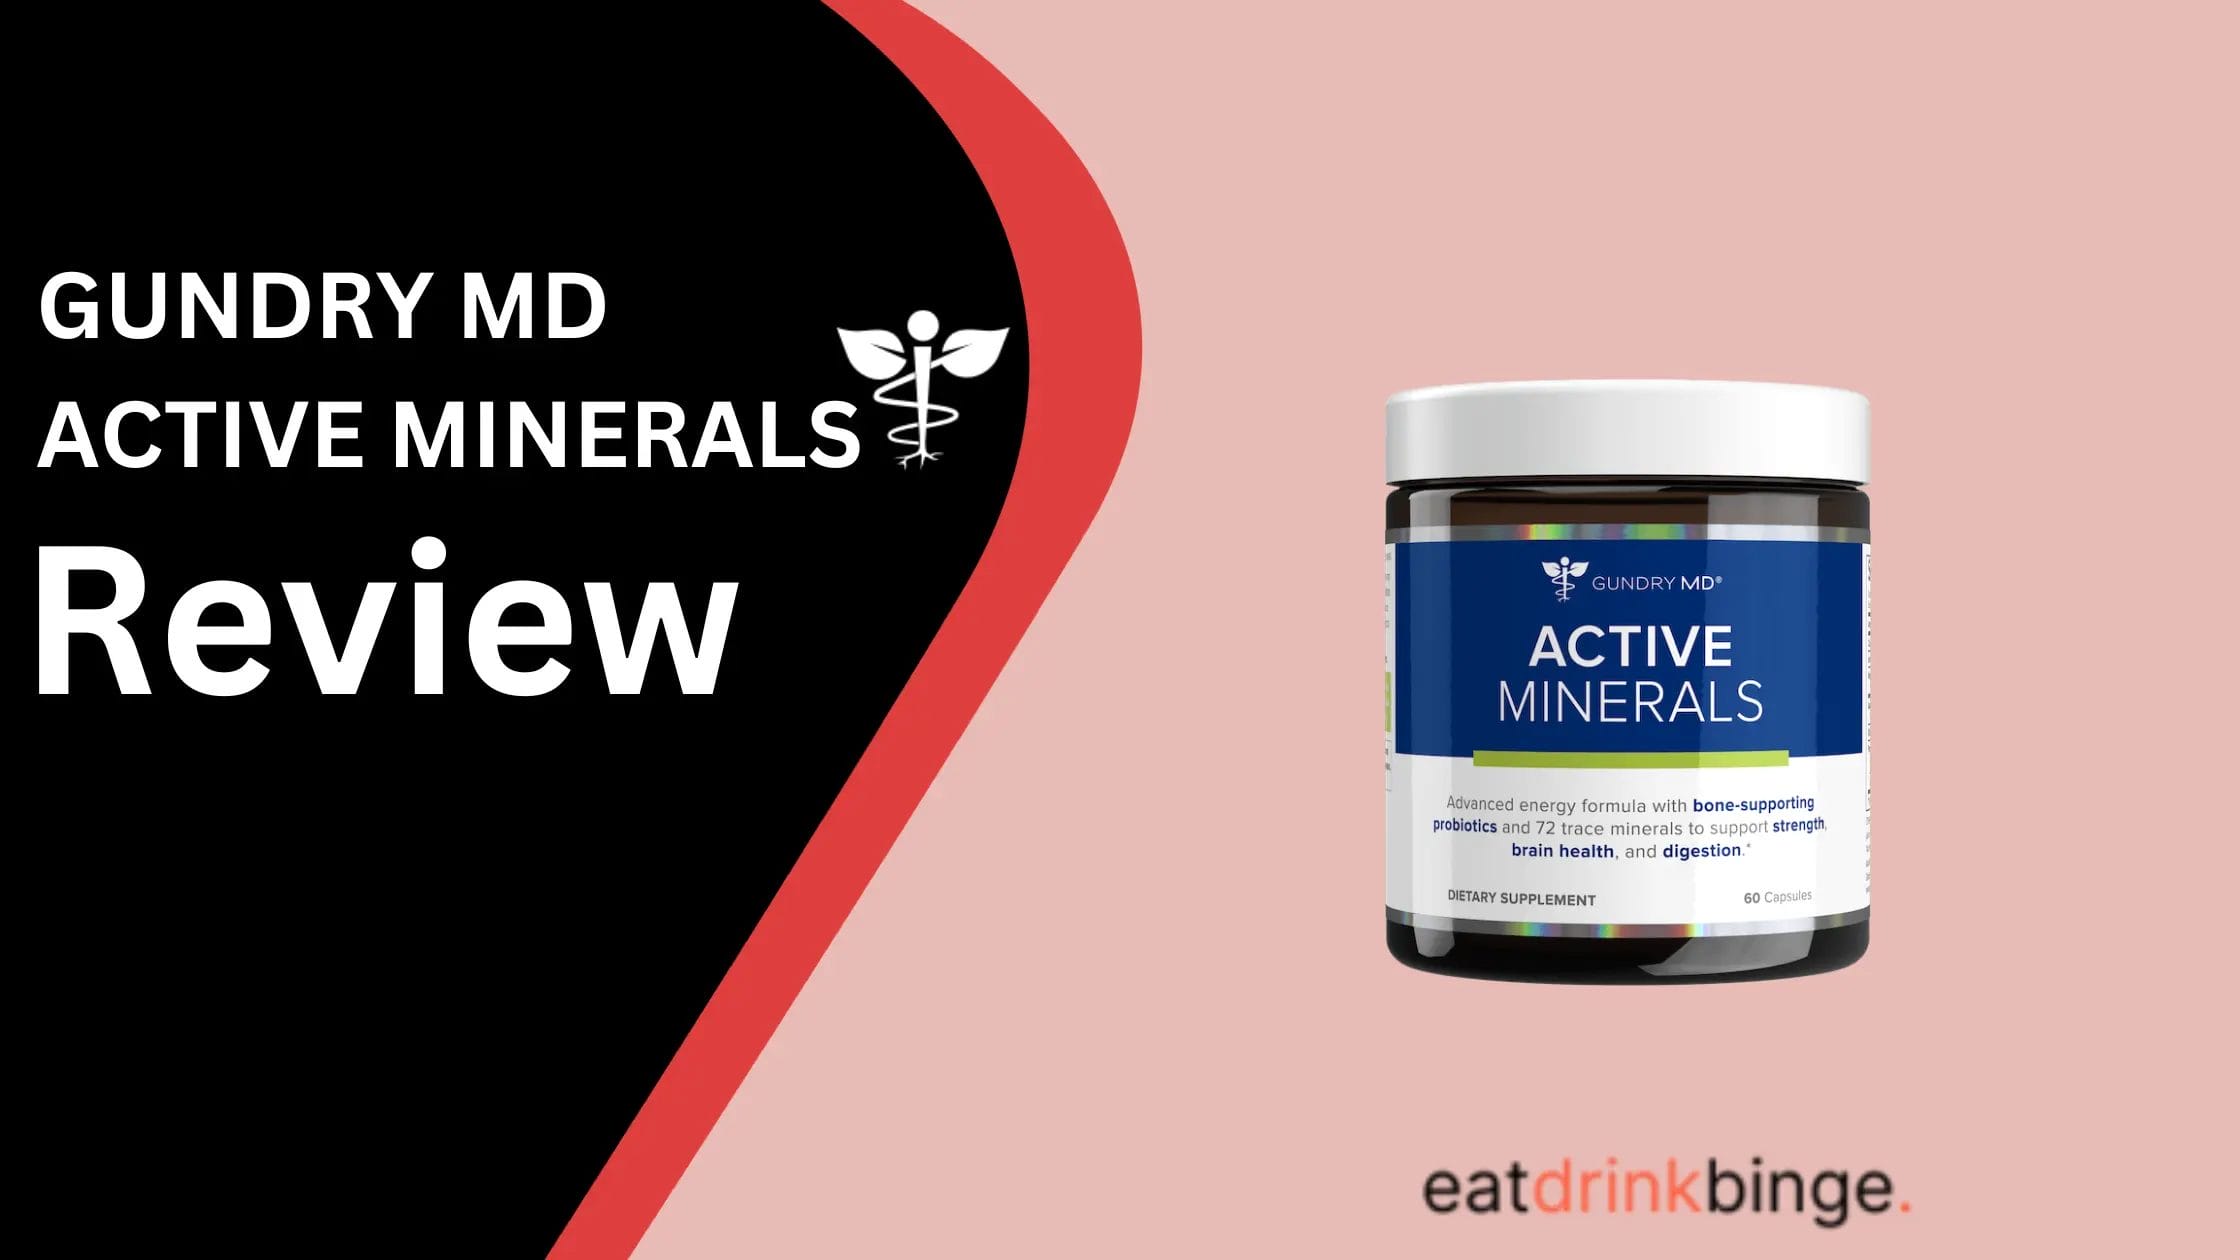 Gundry MD Active Minerals Review